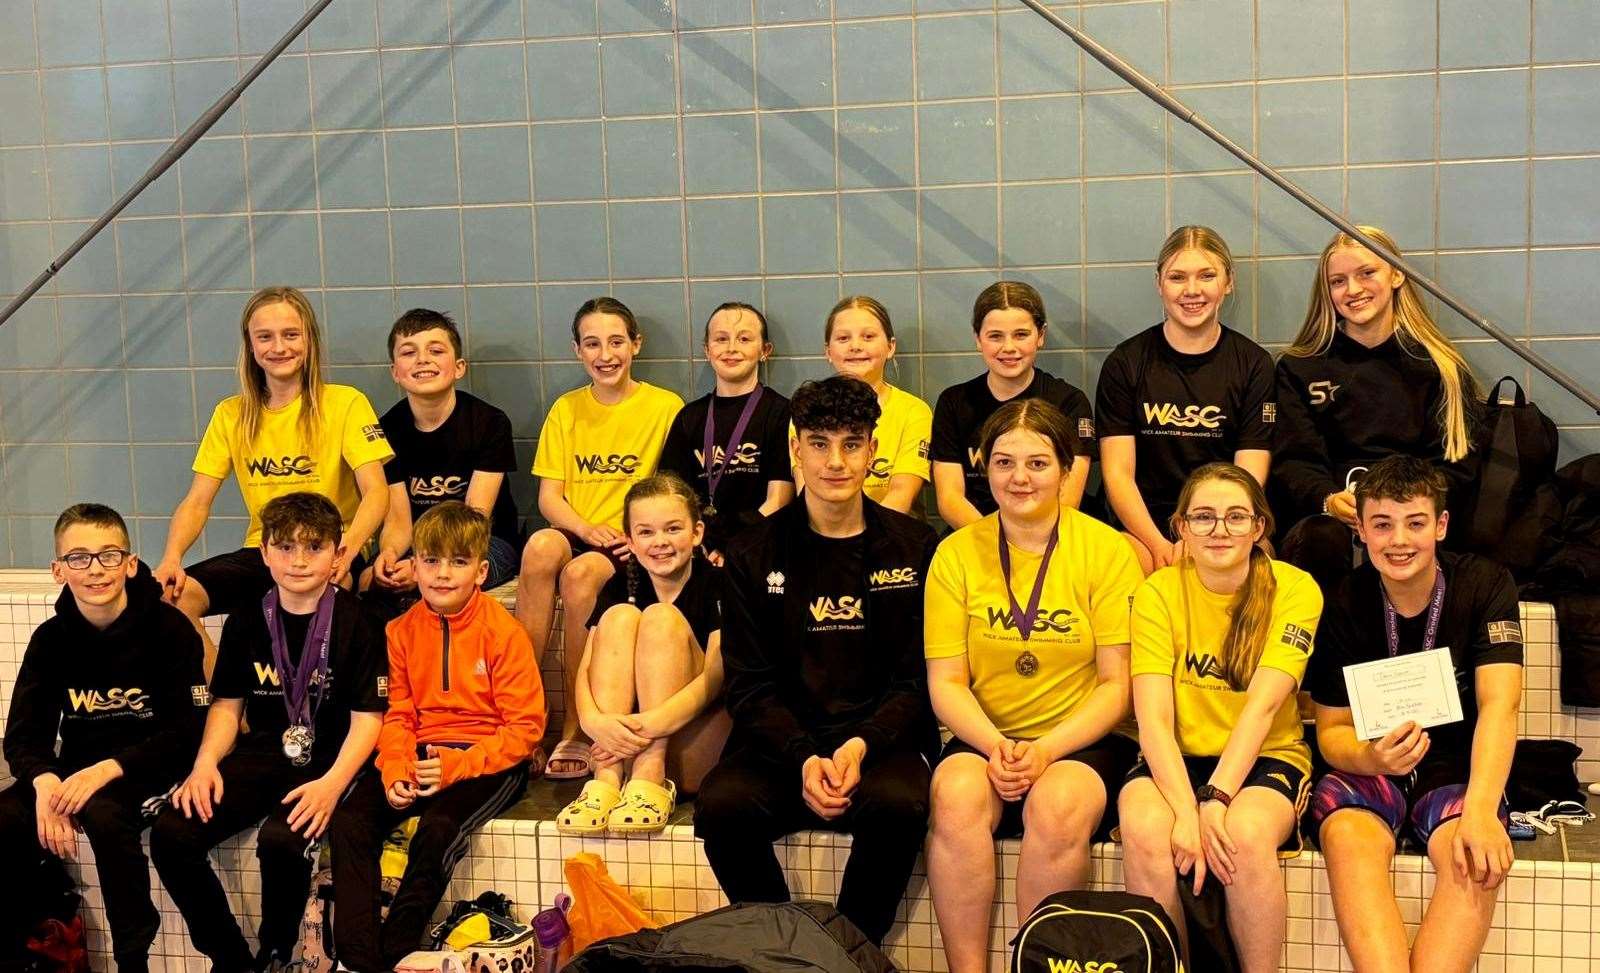 The Wick group at the annual graded meet hosted by Inverness Amateur Swimming Club. They achieved personal bests and a clutch of medals.